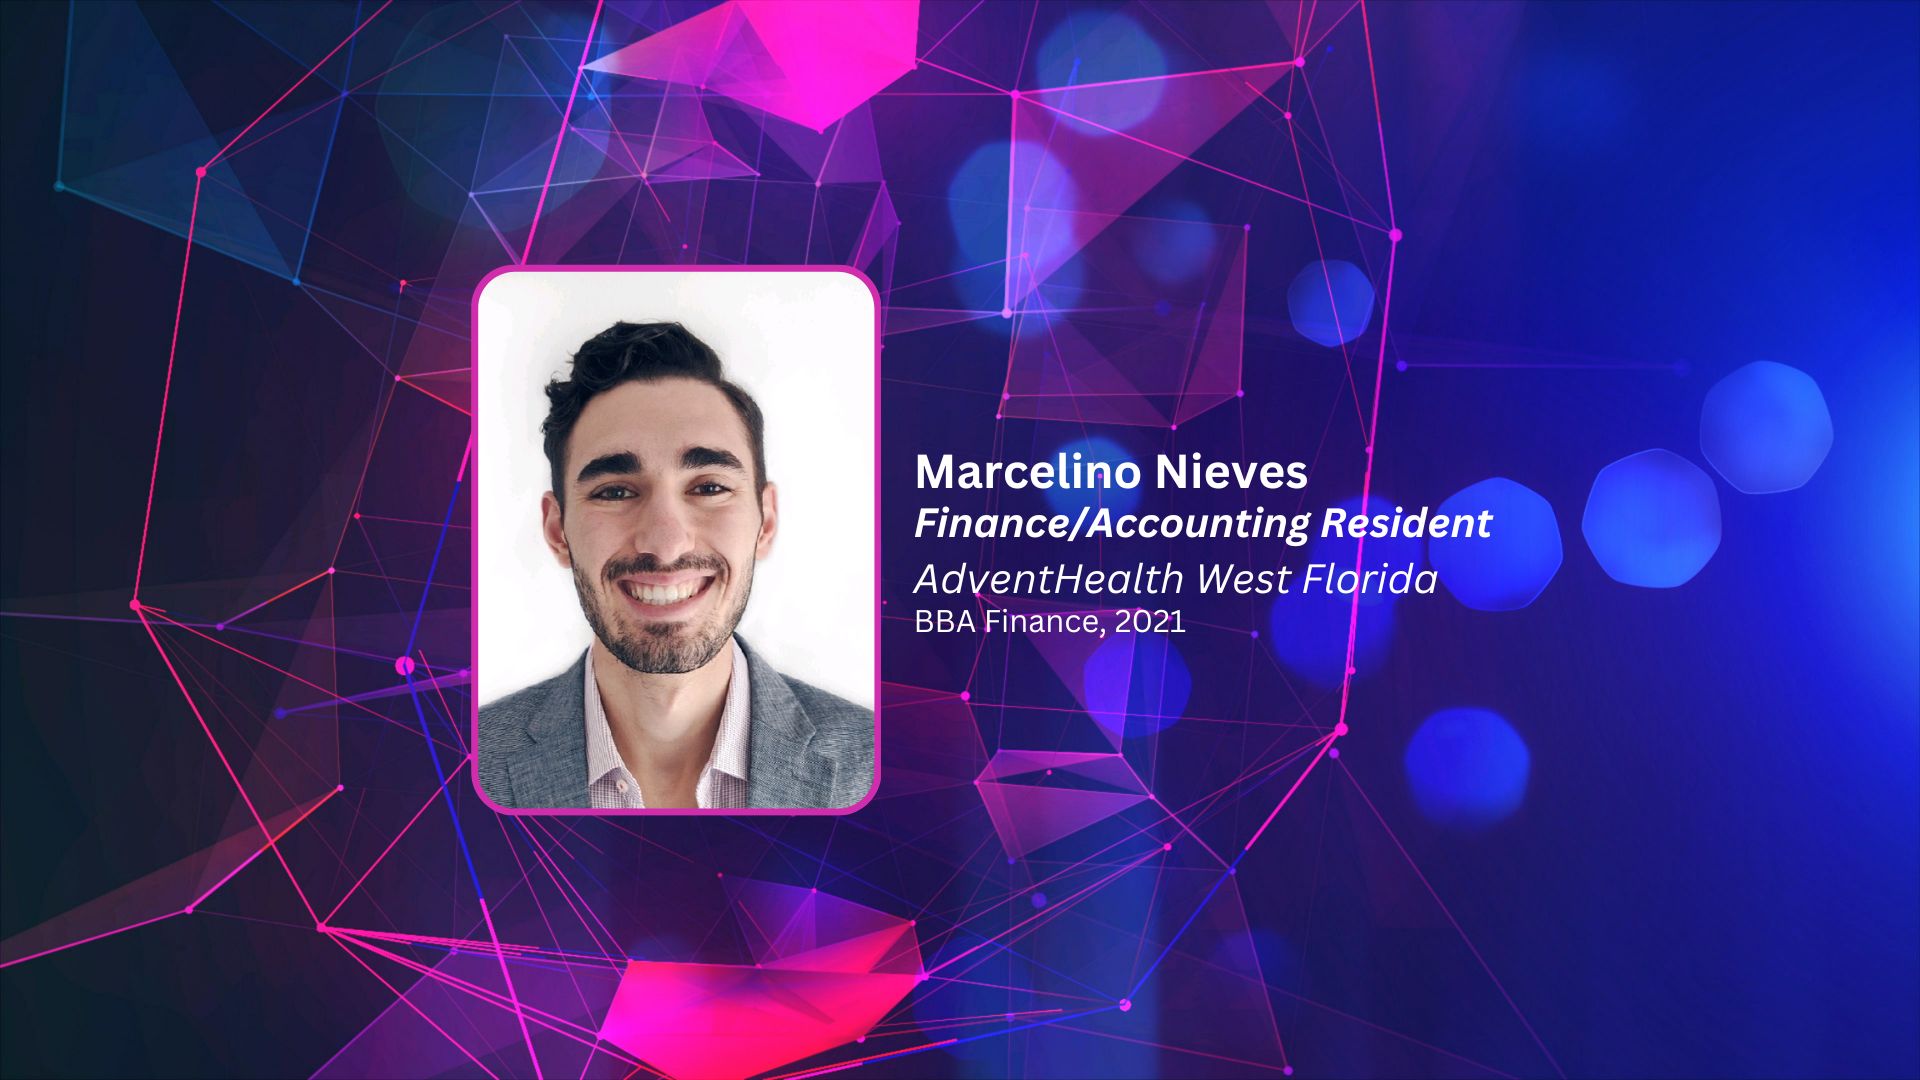 Marcelino Nieves: A Passionate Finance Professional with a Heart for People